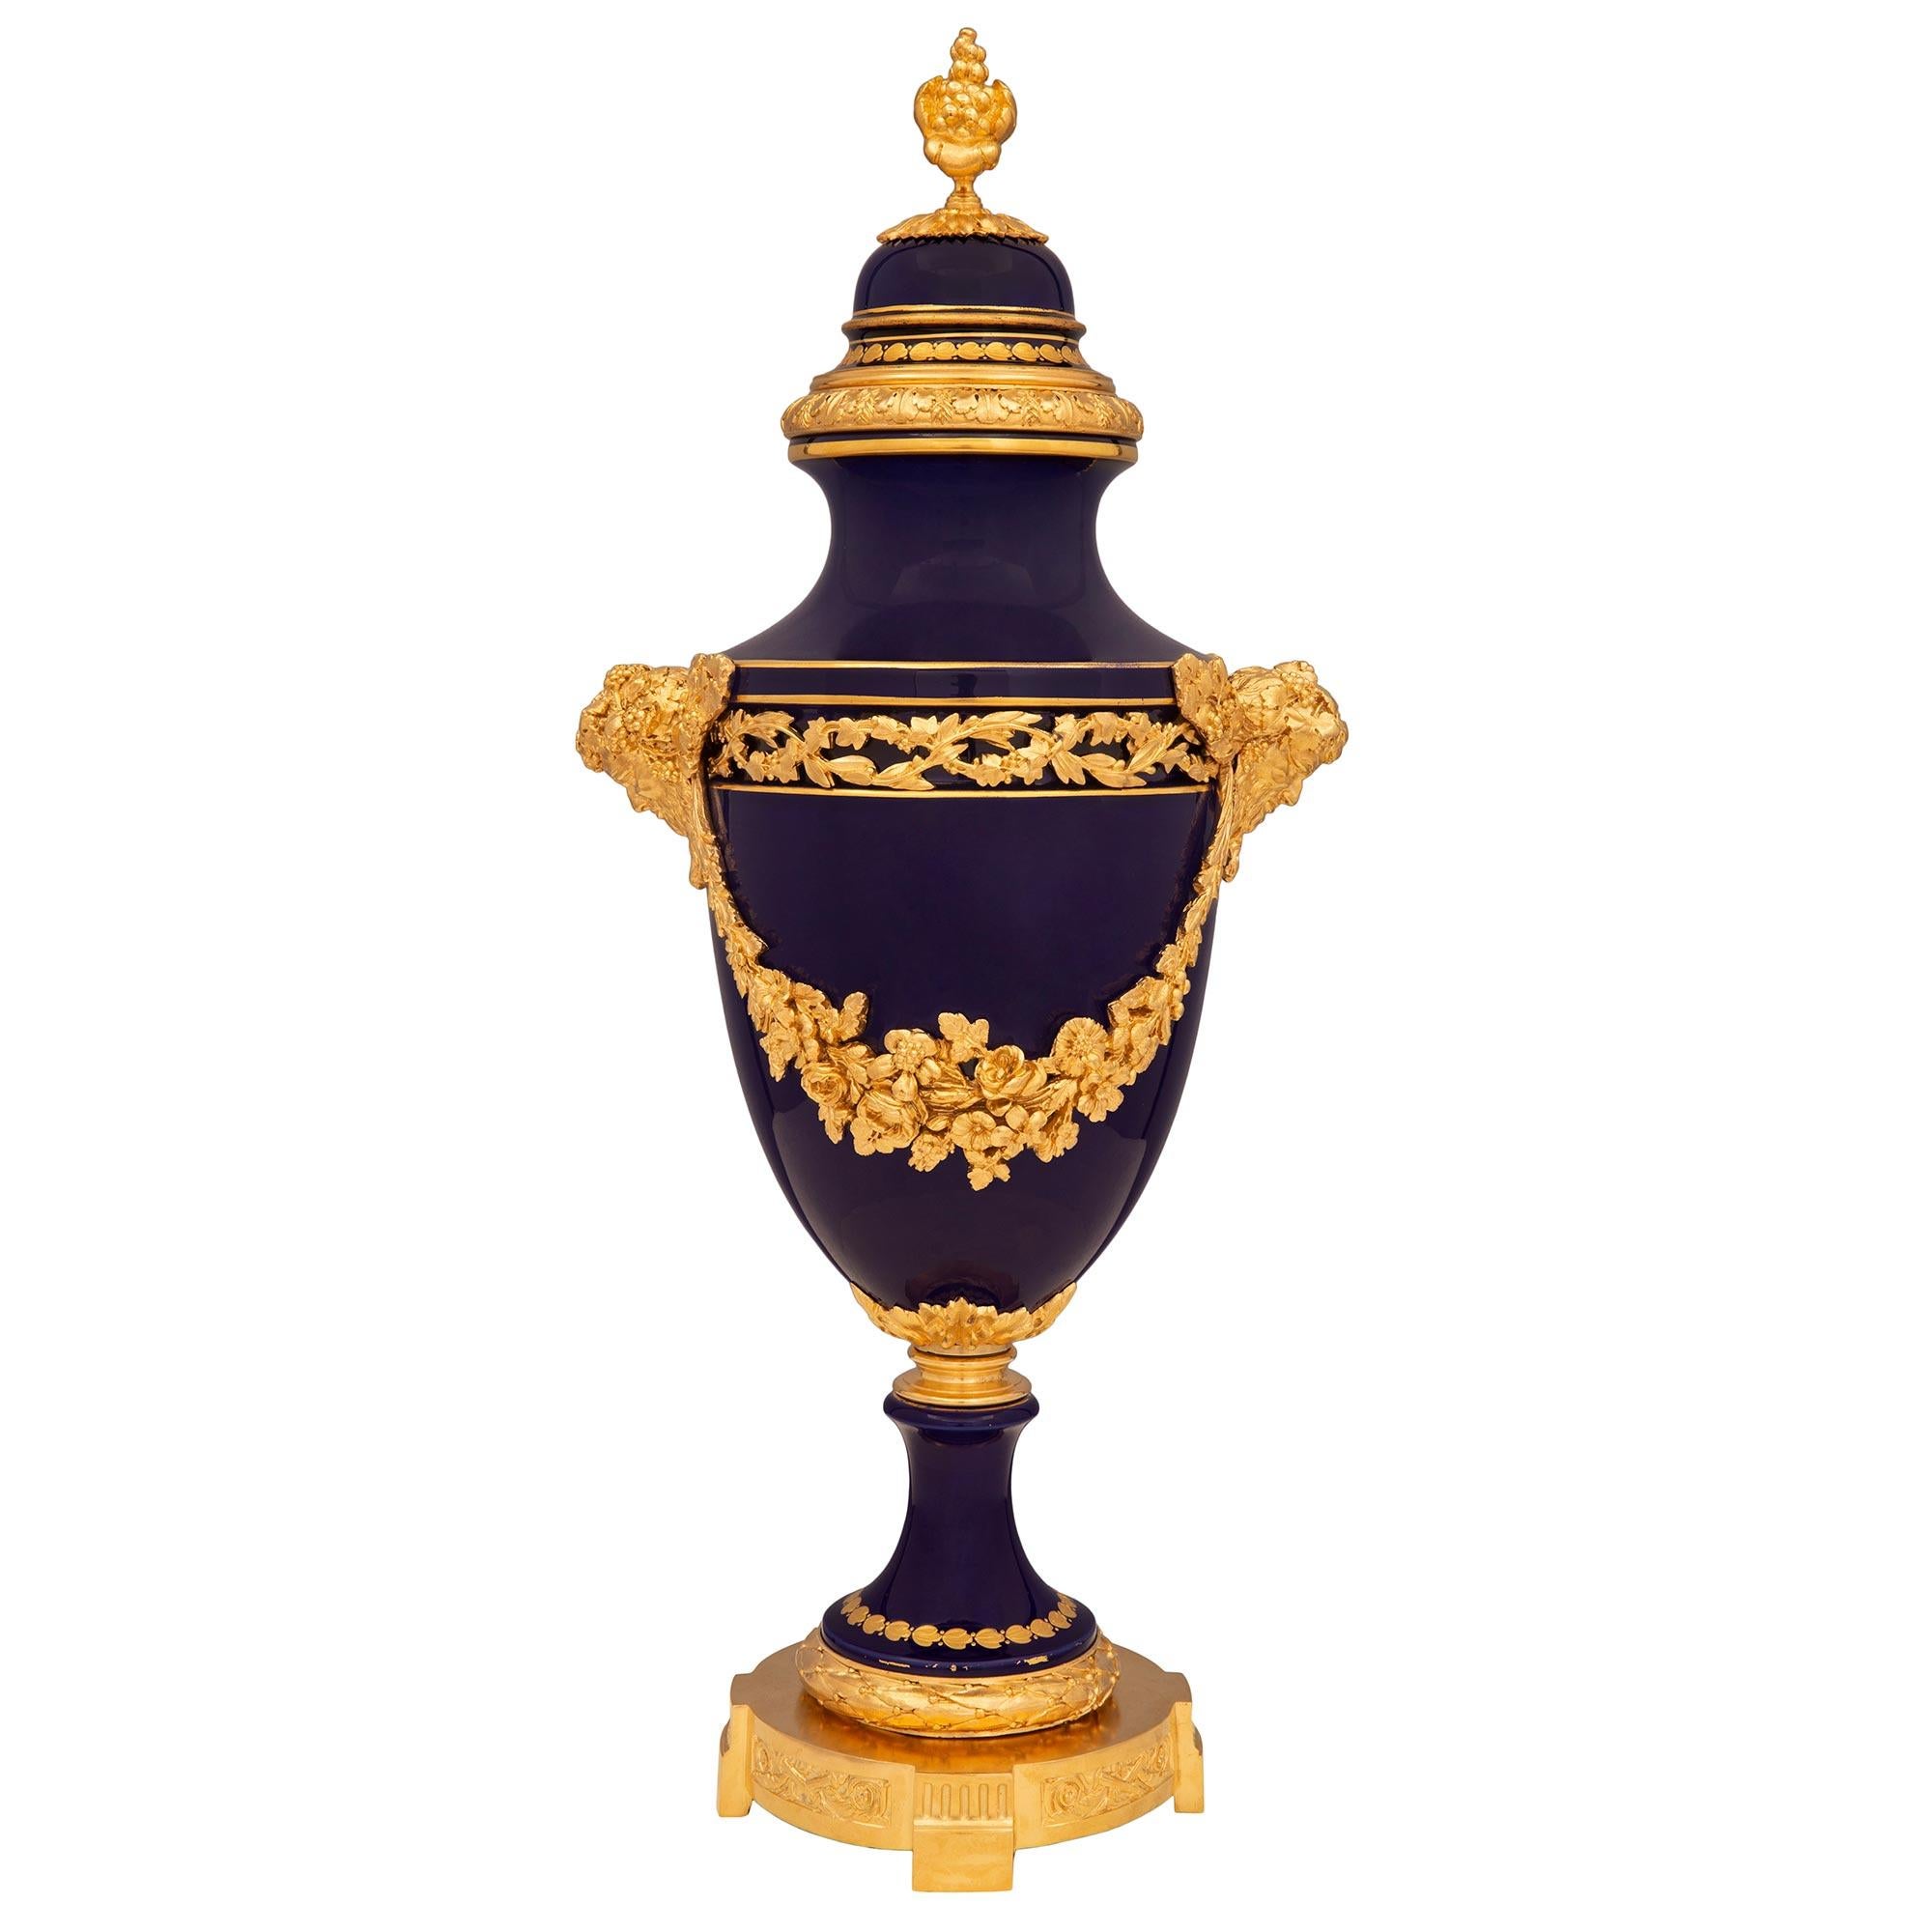 French 19th Century Louis XVI St. Sèvres Porcelain and Ormolu Lidded Urn For Sale 1